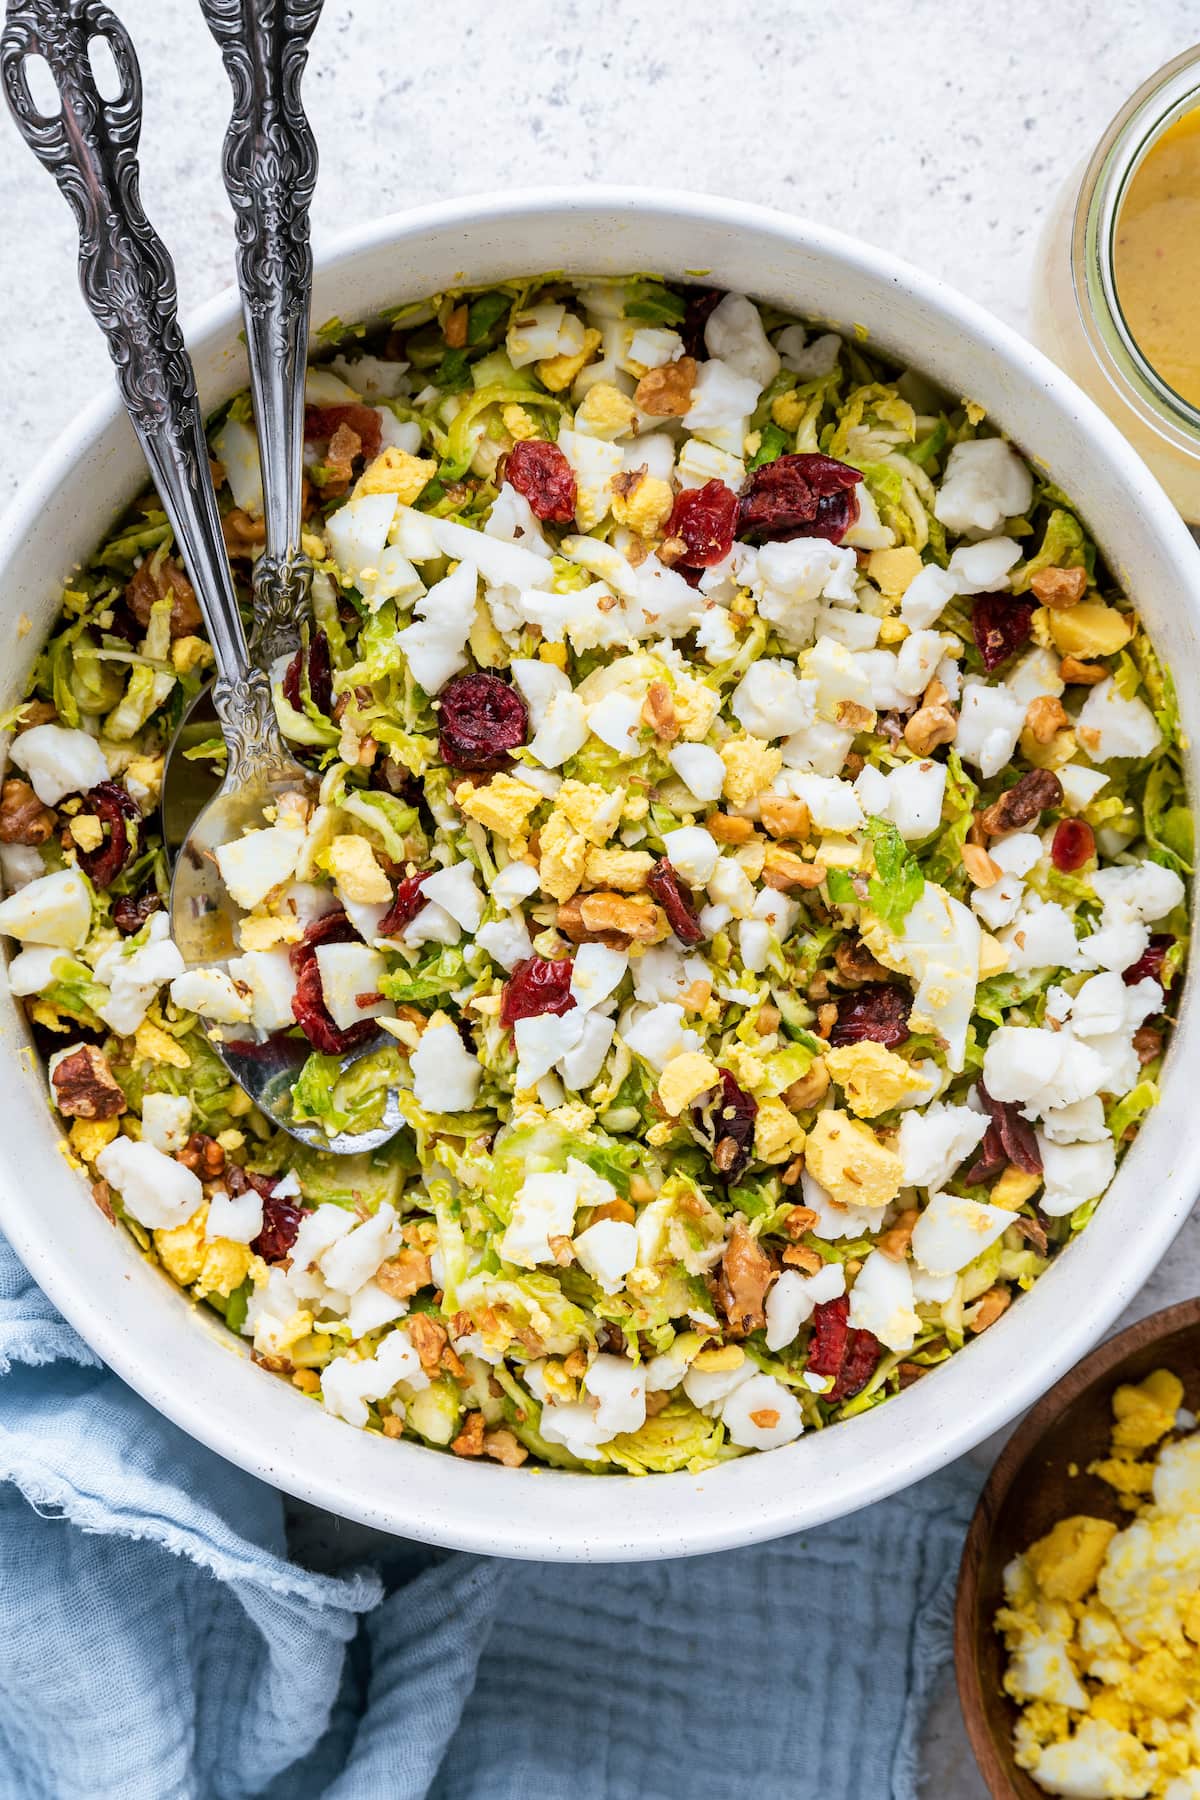 A large white bowl with two metal serving spoons containing the Brussels sprout chopped salad.